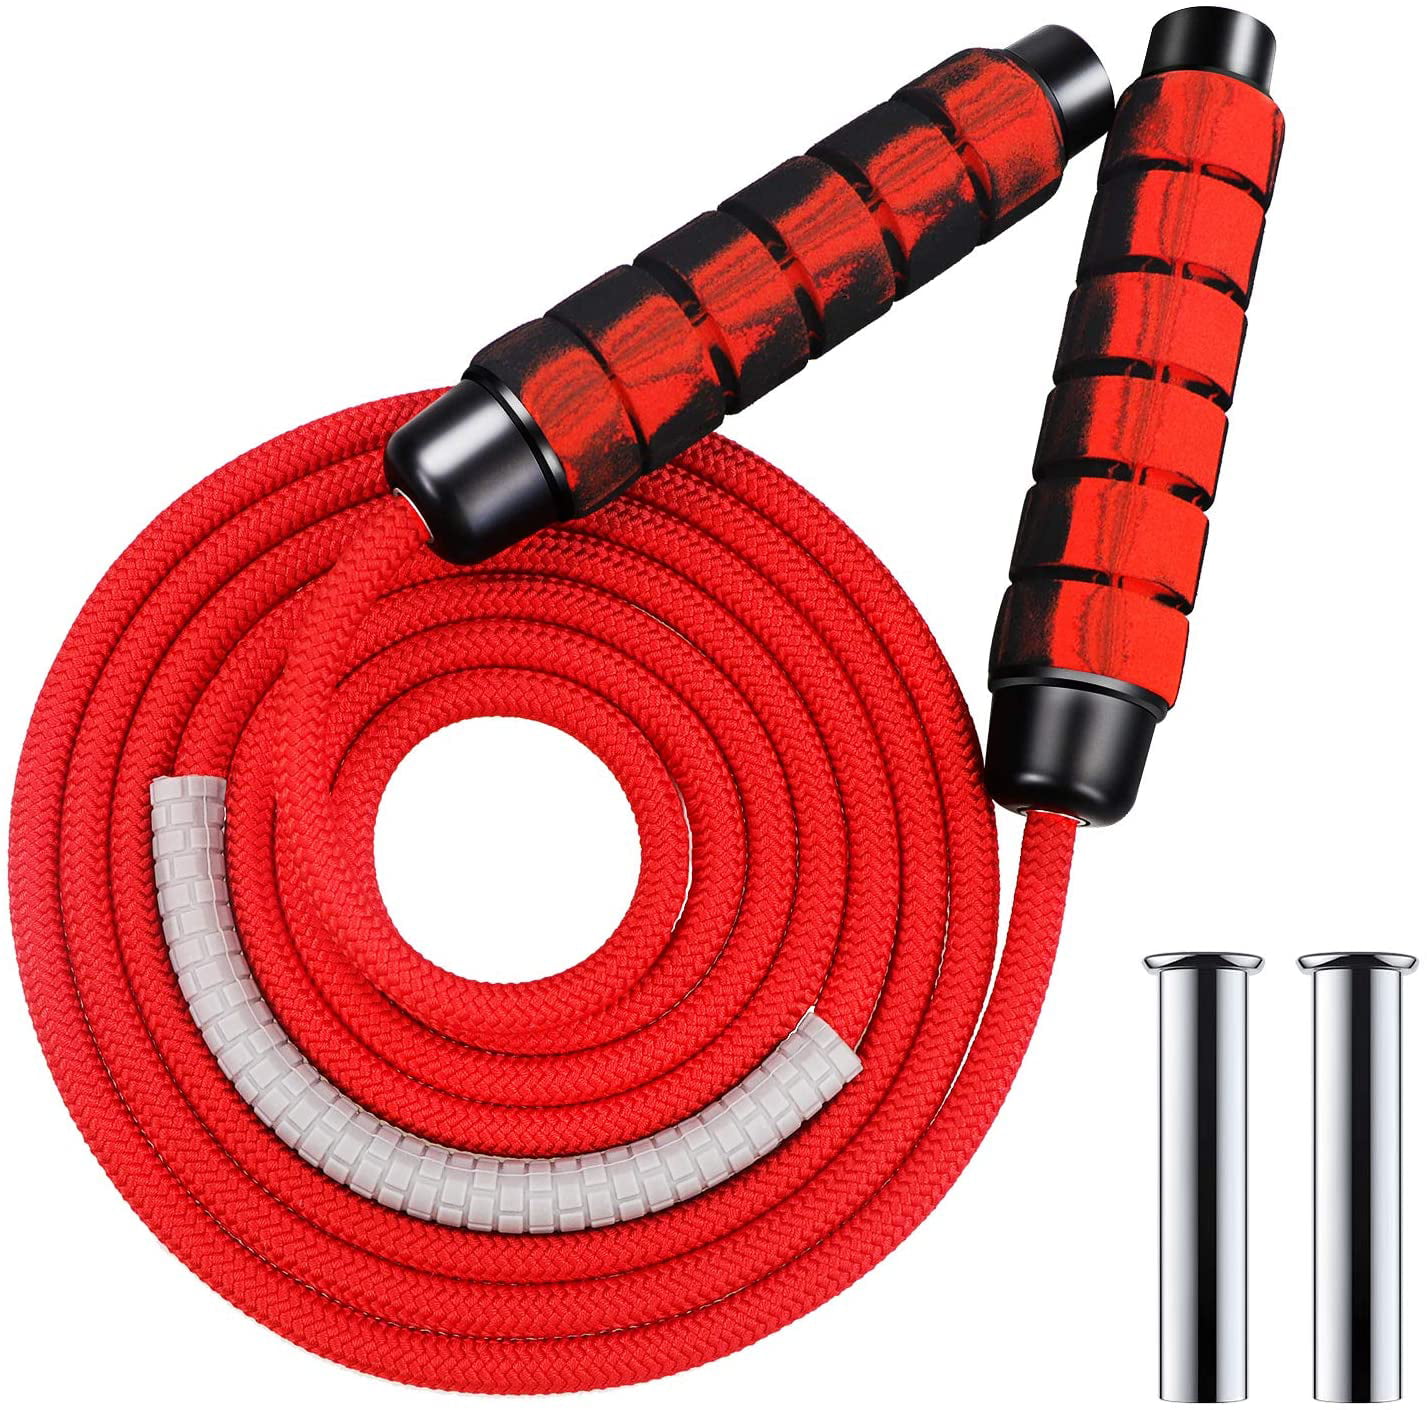 MMA Boxing Speed Cardio Gym Excercise Fitness Skipping Jump Rope 3M PVC Crossfit 